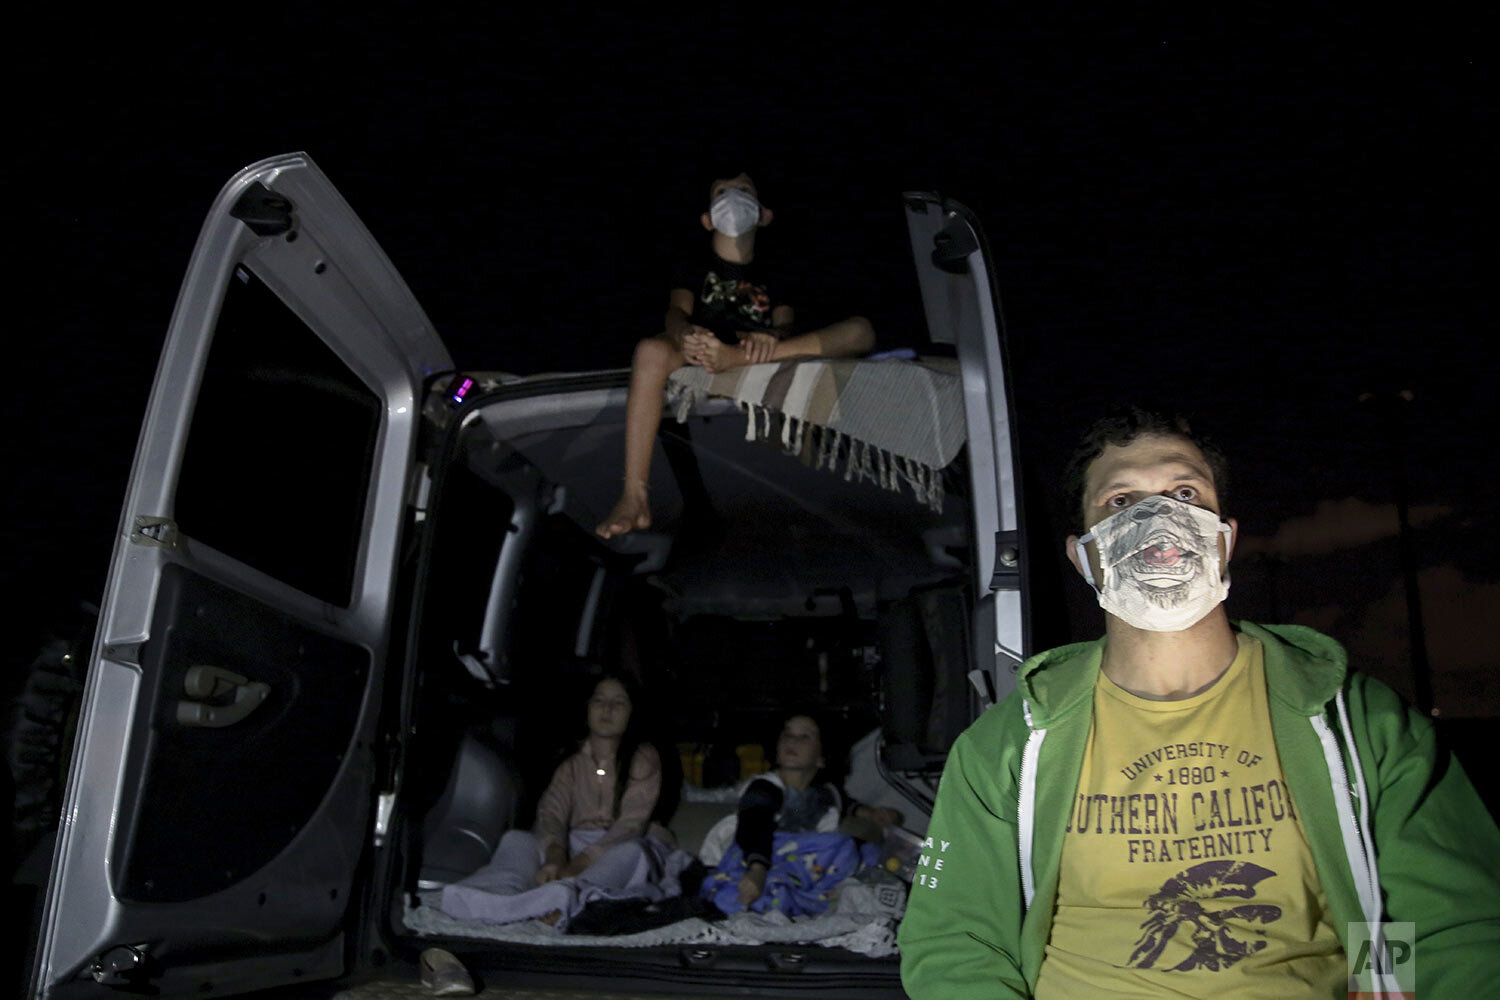  Eduardo Cavalcanti and his children watch a film at a drive-in movie theater where drivers must leave one space empty between them amid the new coronavirus pandemic in Brasilia, Brazil, Wednesday, May 13, 2020. (AP Photo/Eraldo Peres) 